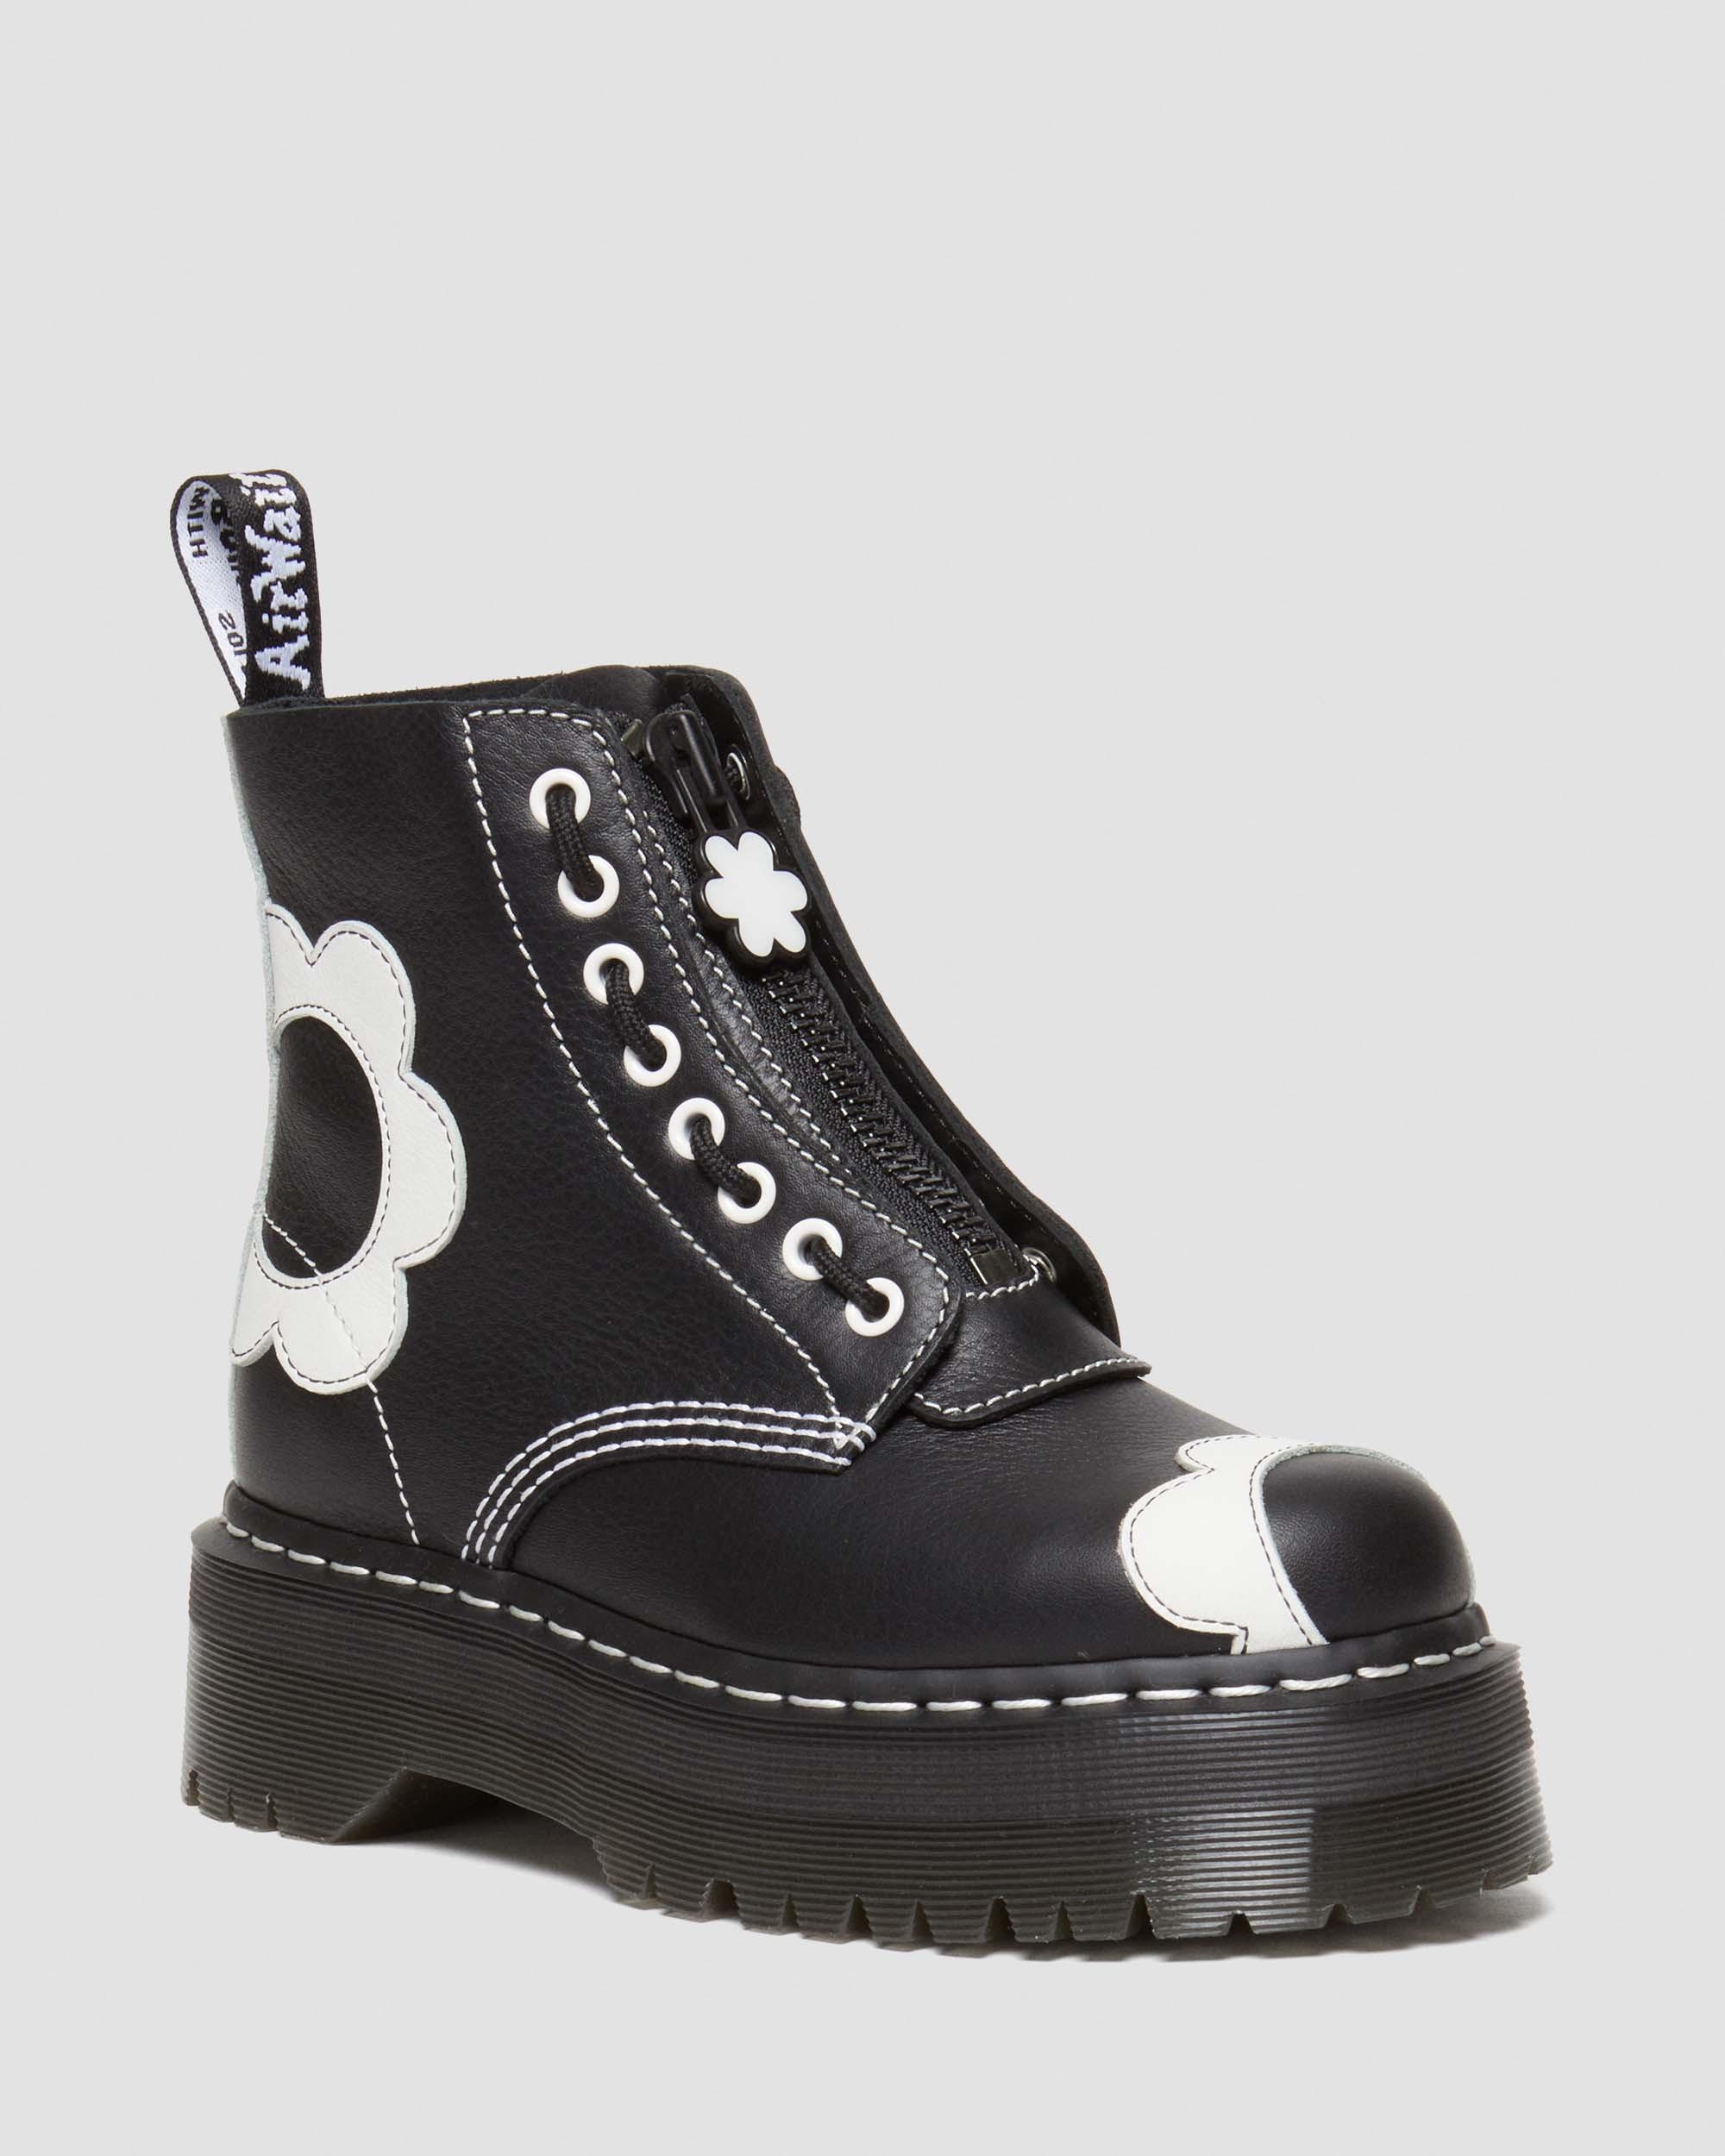 Sinclair Flower Pisa Leather Platform Boots in Black+Optical White